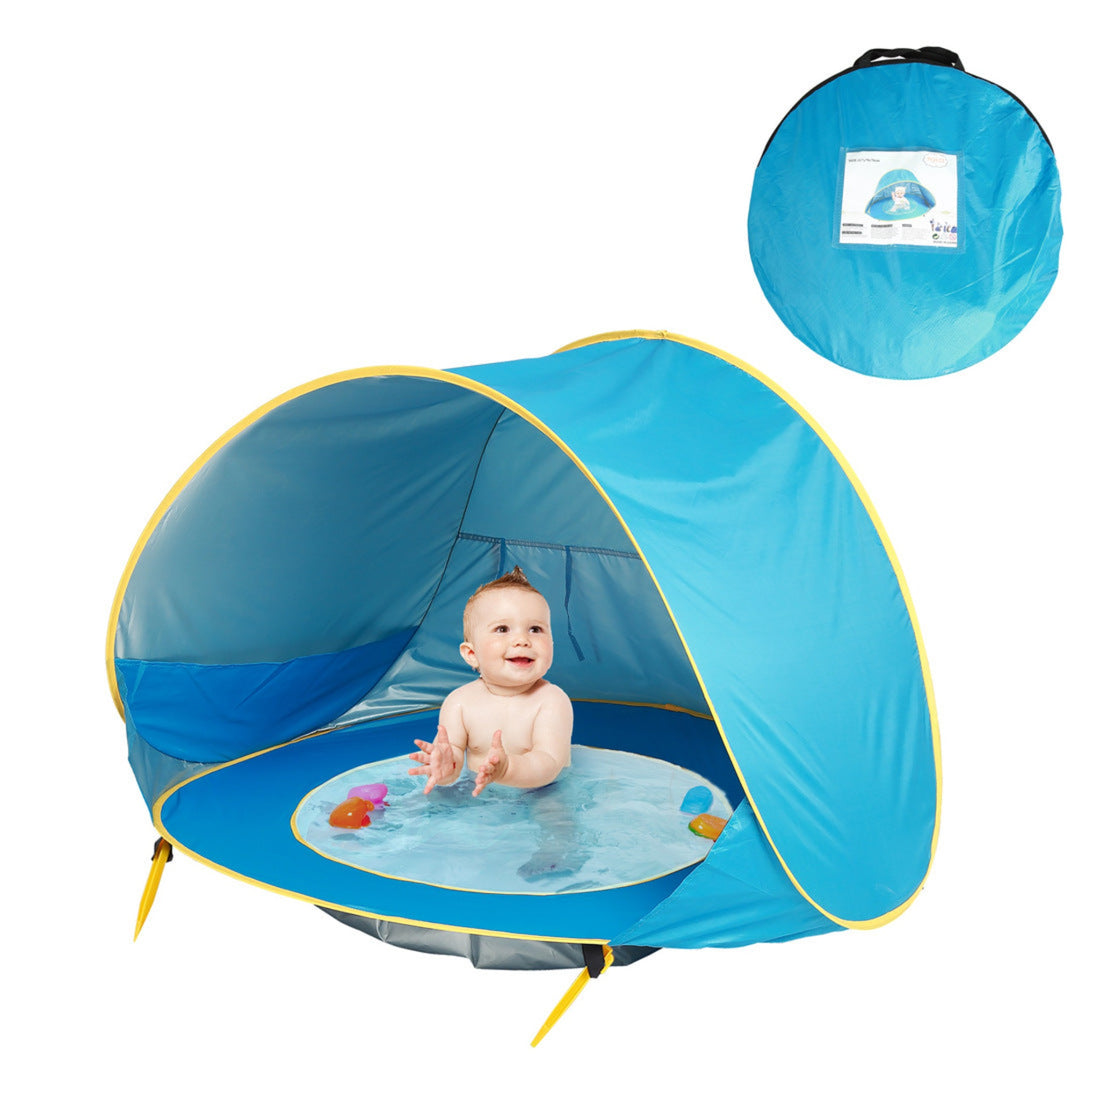 Waterproof sun awning tent for babies